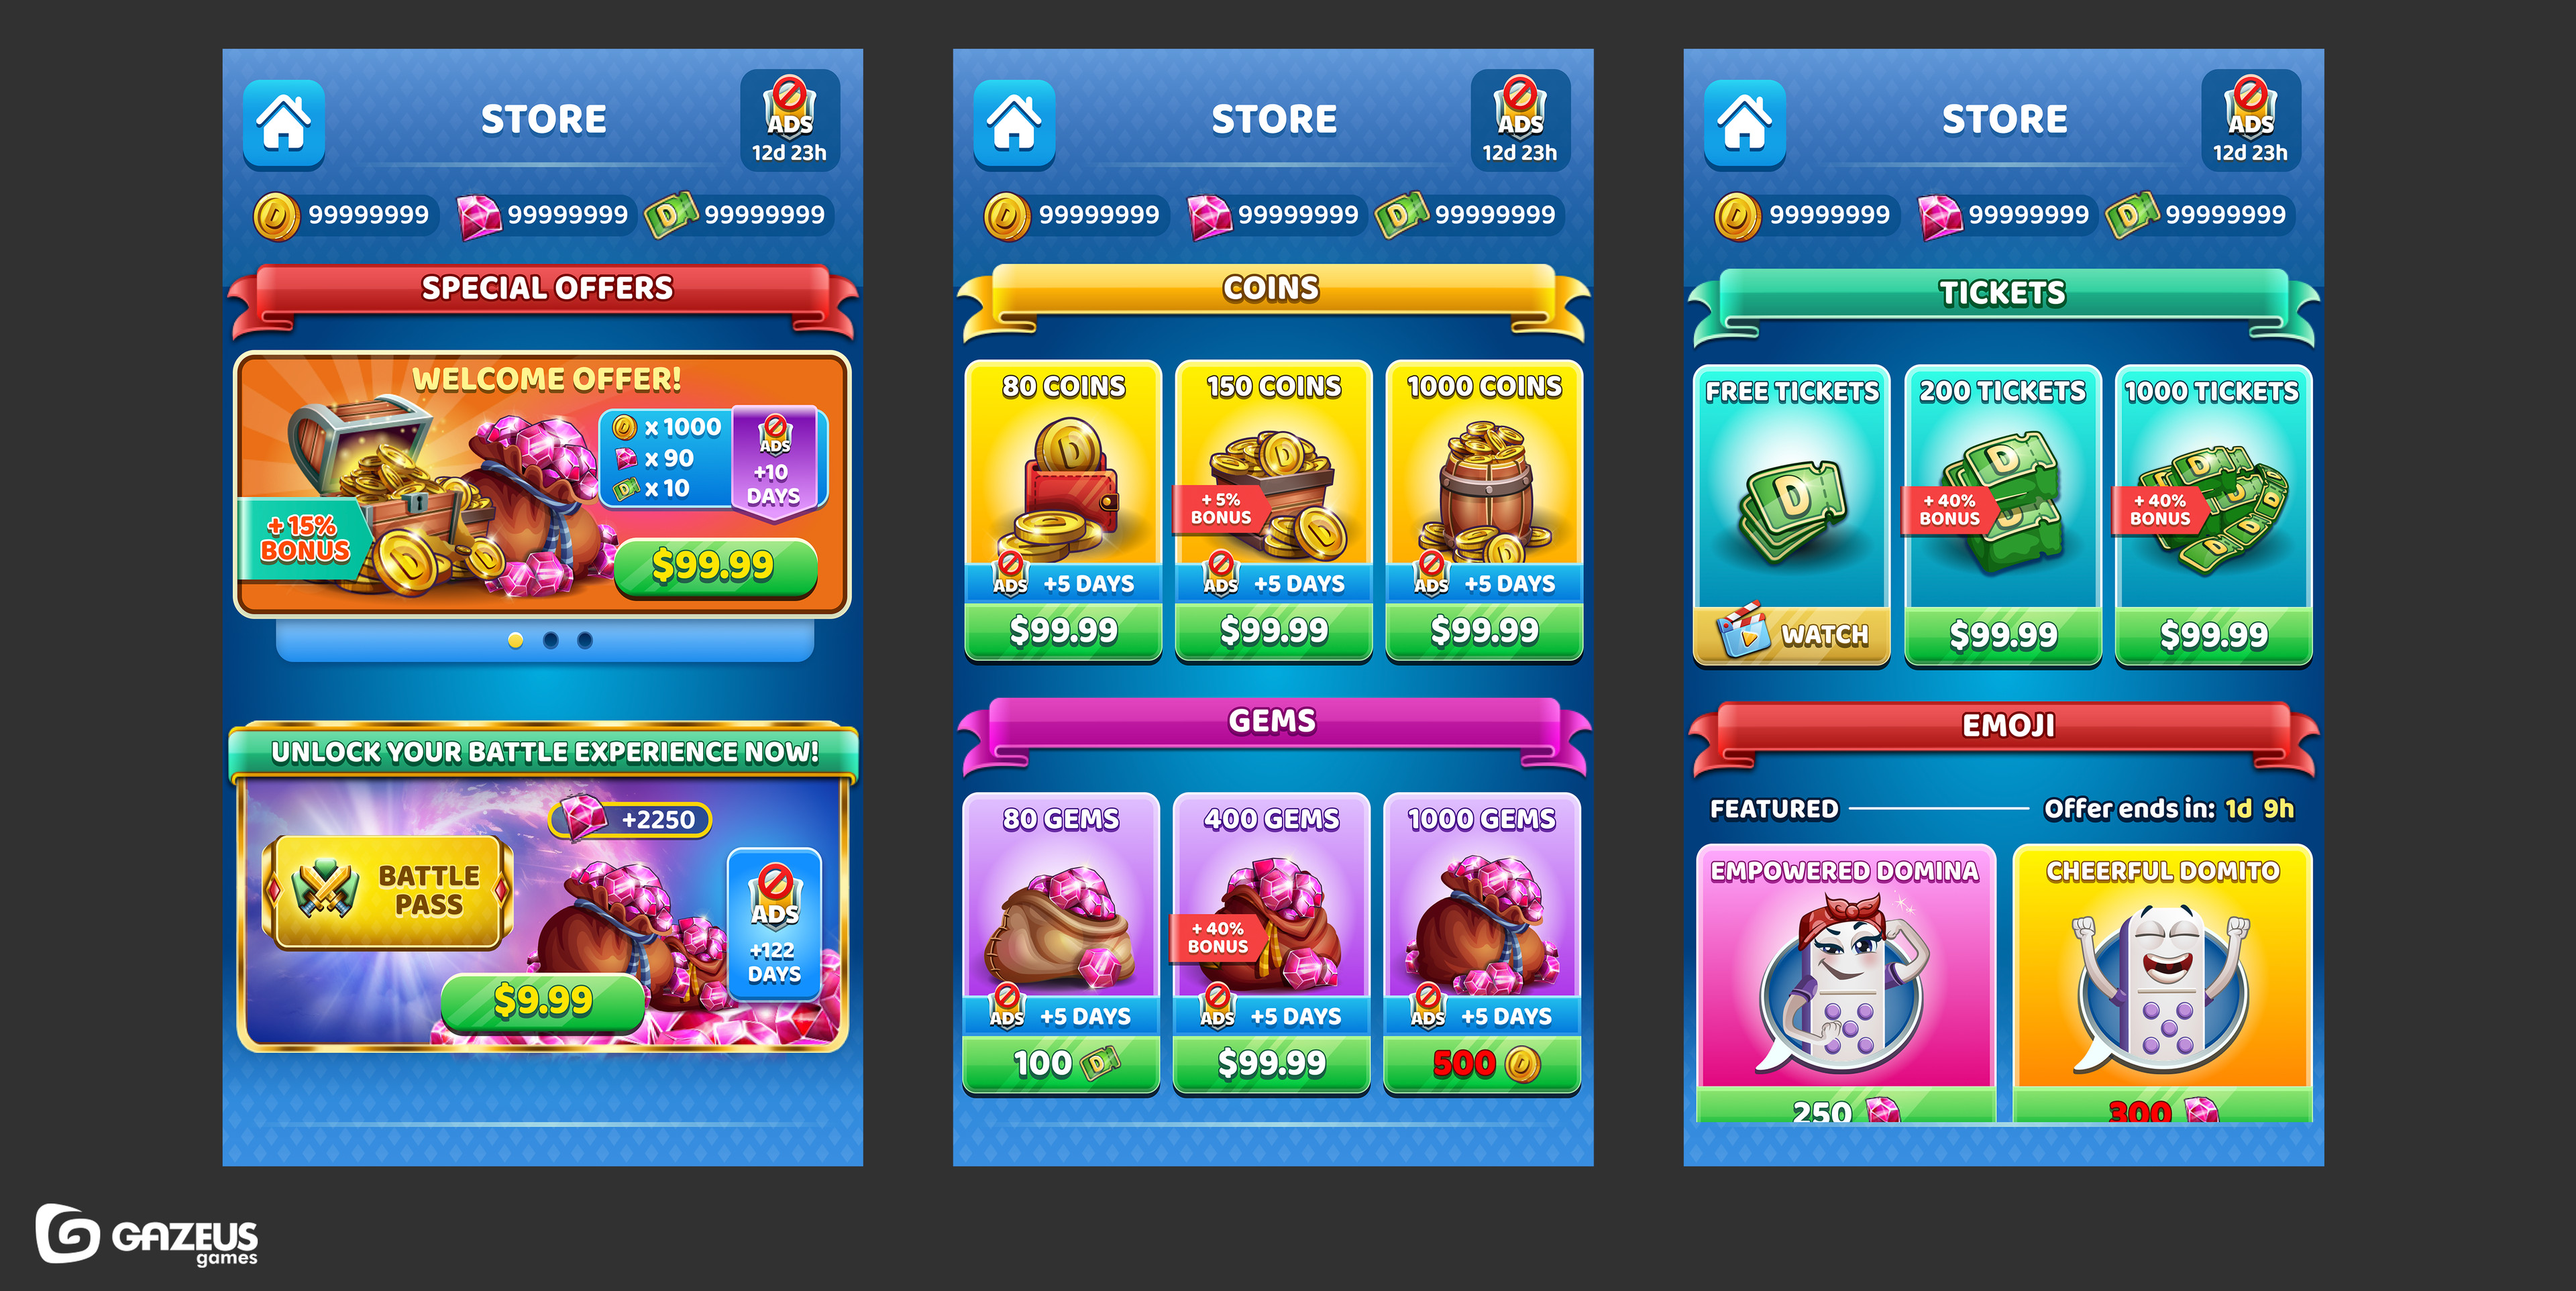 Game Store. Art direction, UI/UX, Illustrations.